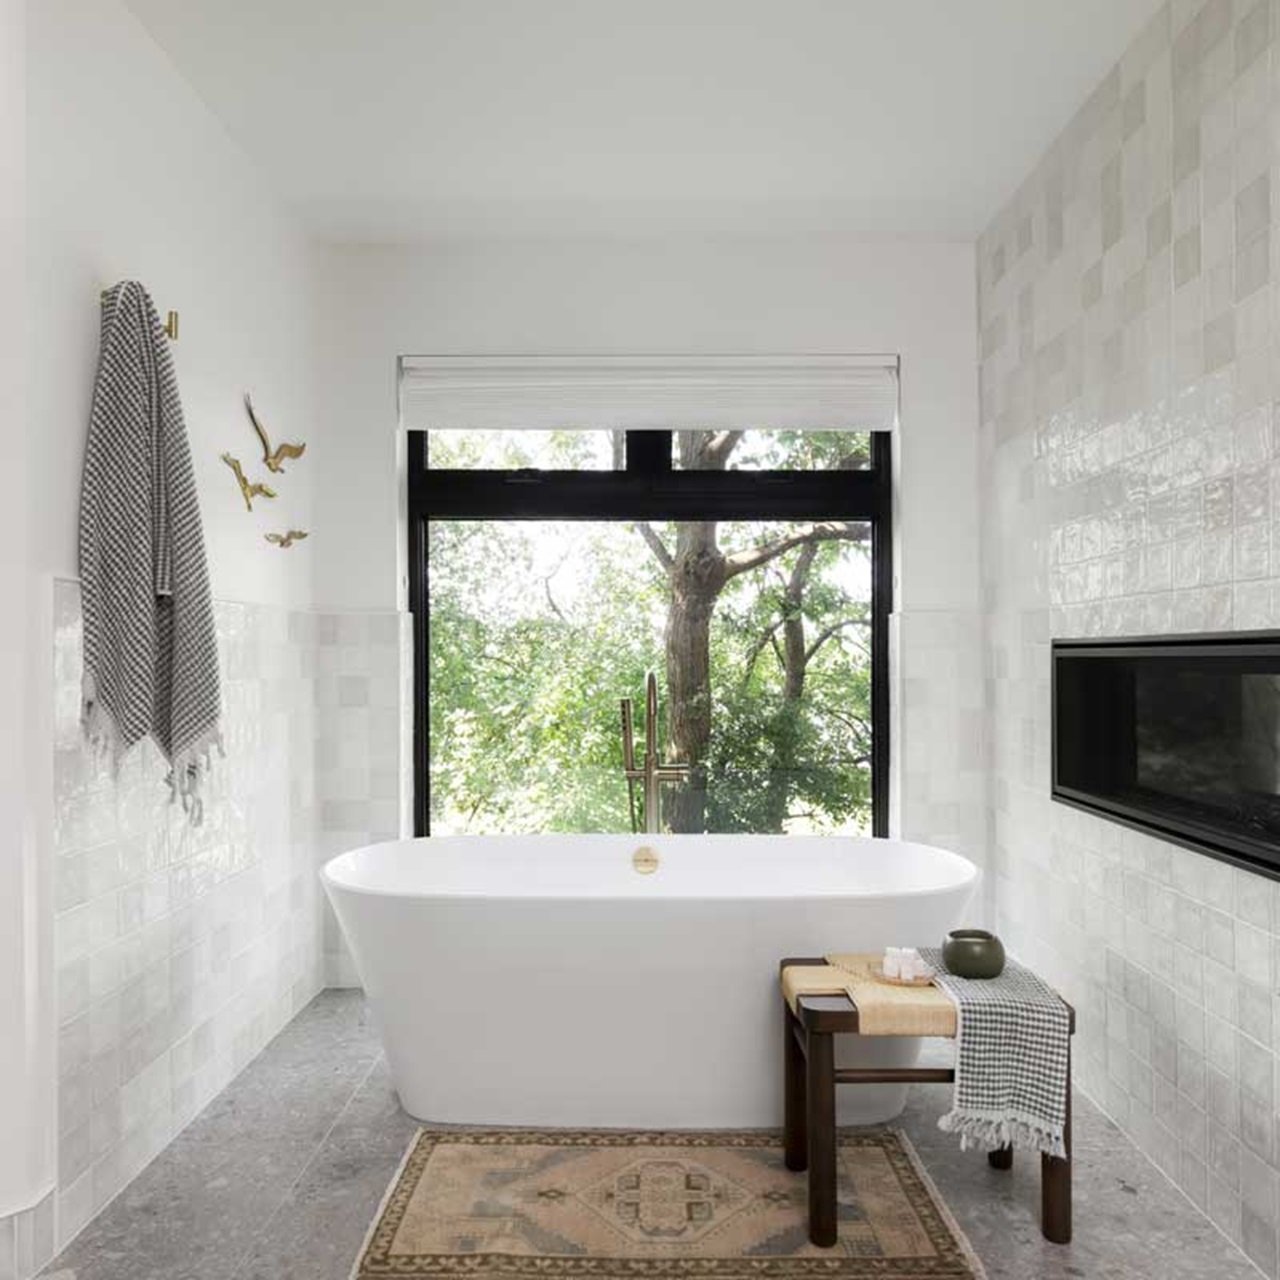 White tiled bathroom with large marvin picture window